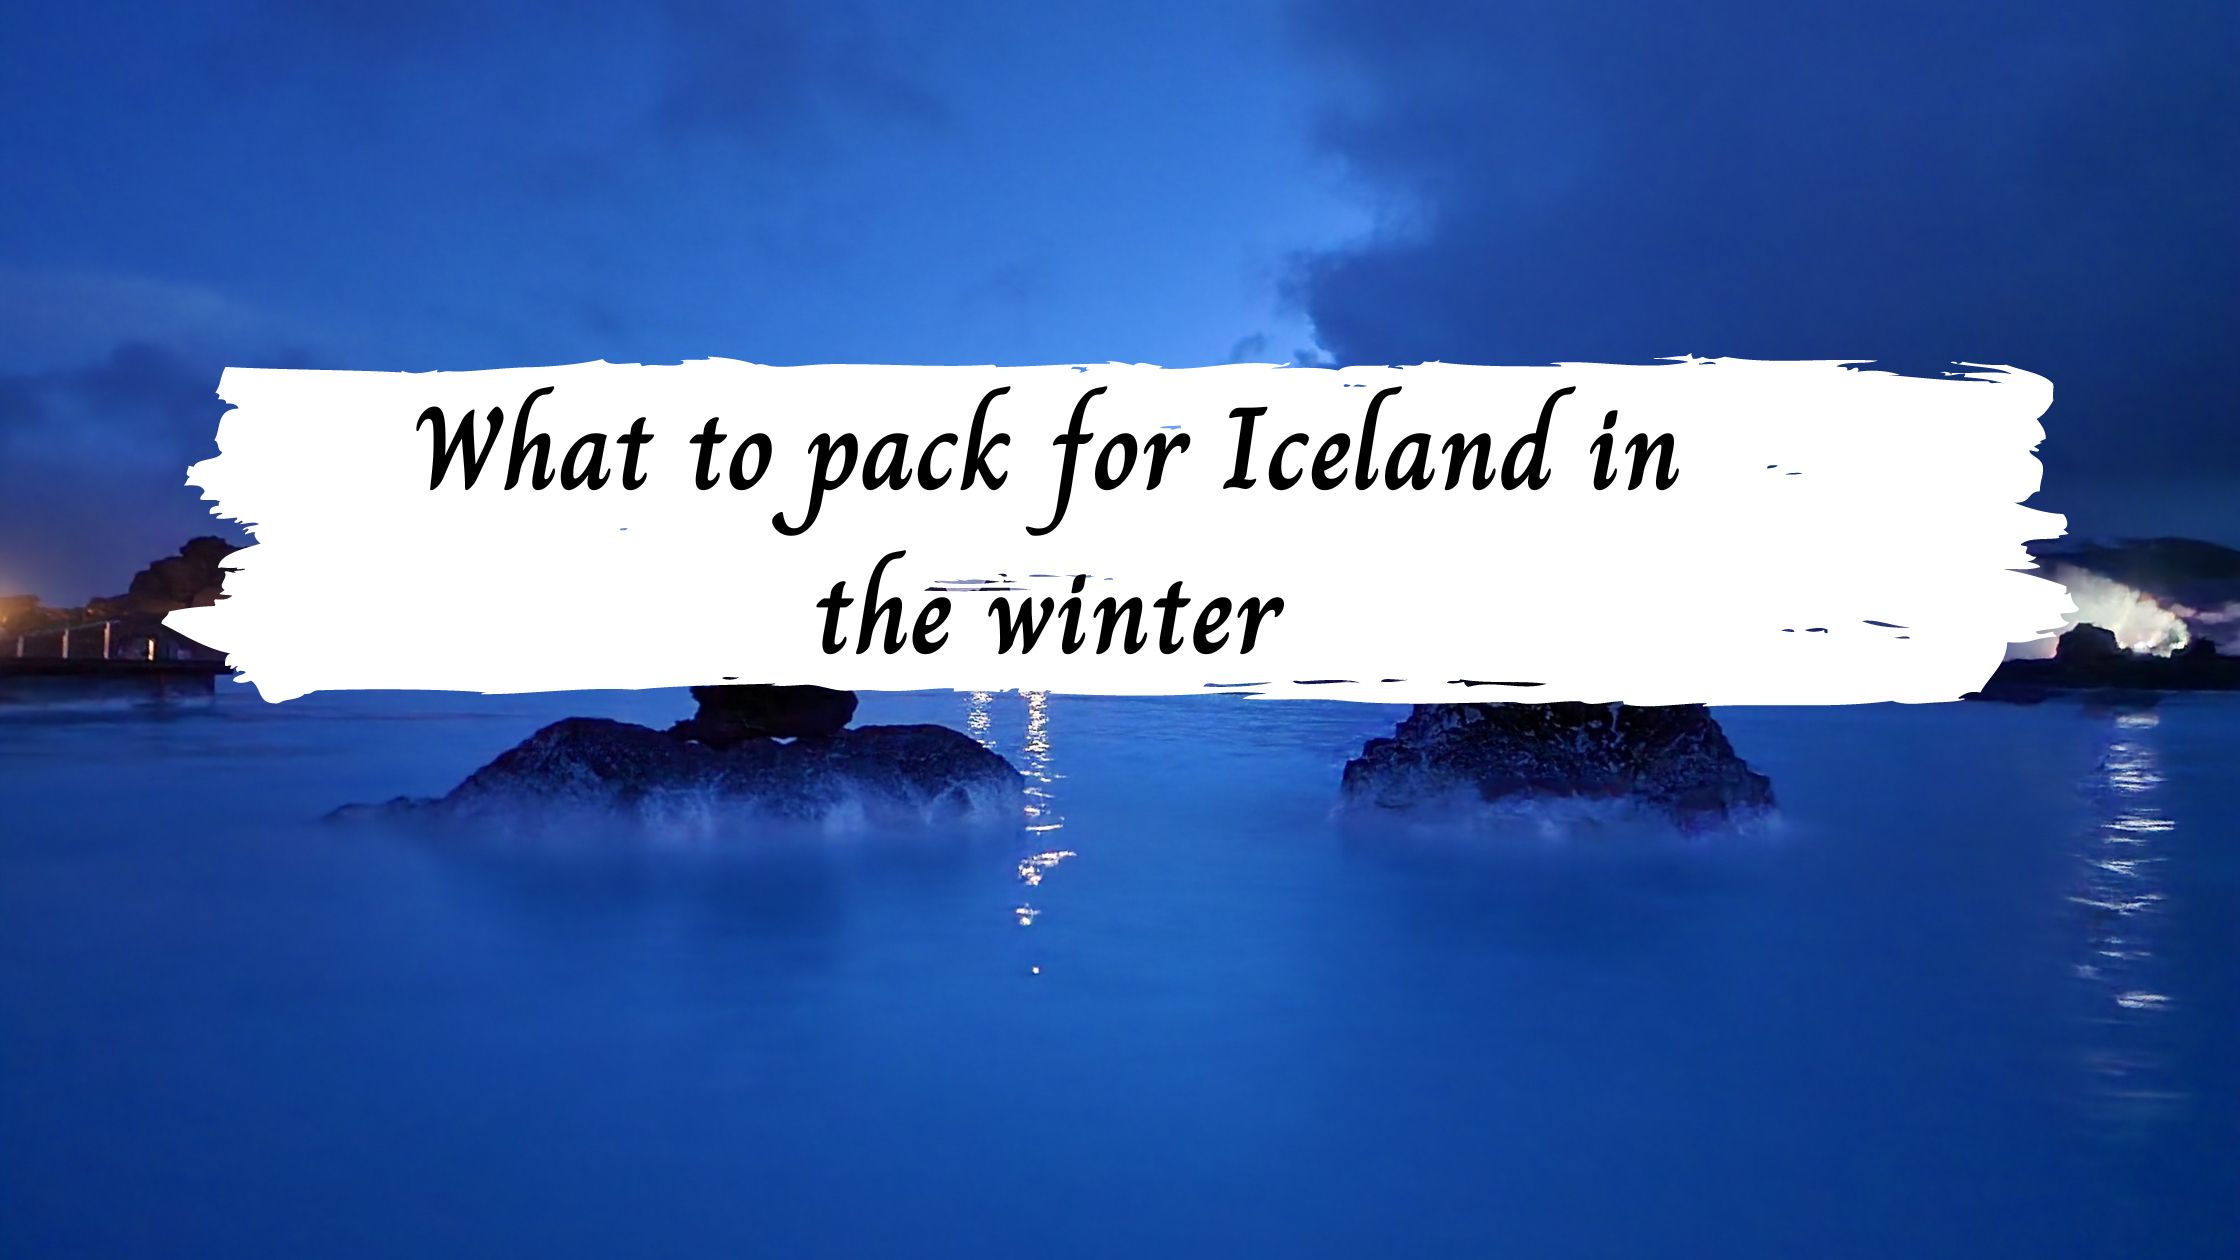 What to pack for Iceland in the winter